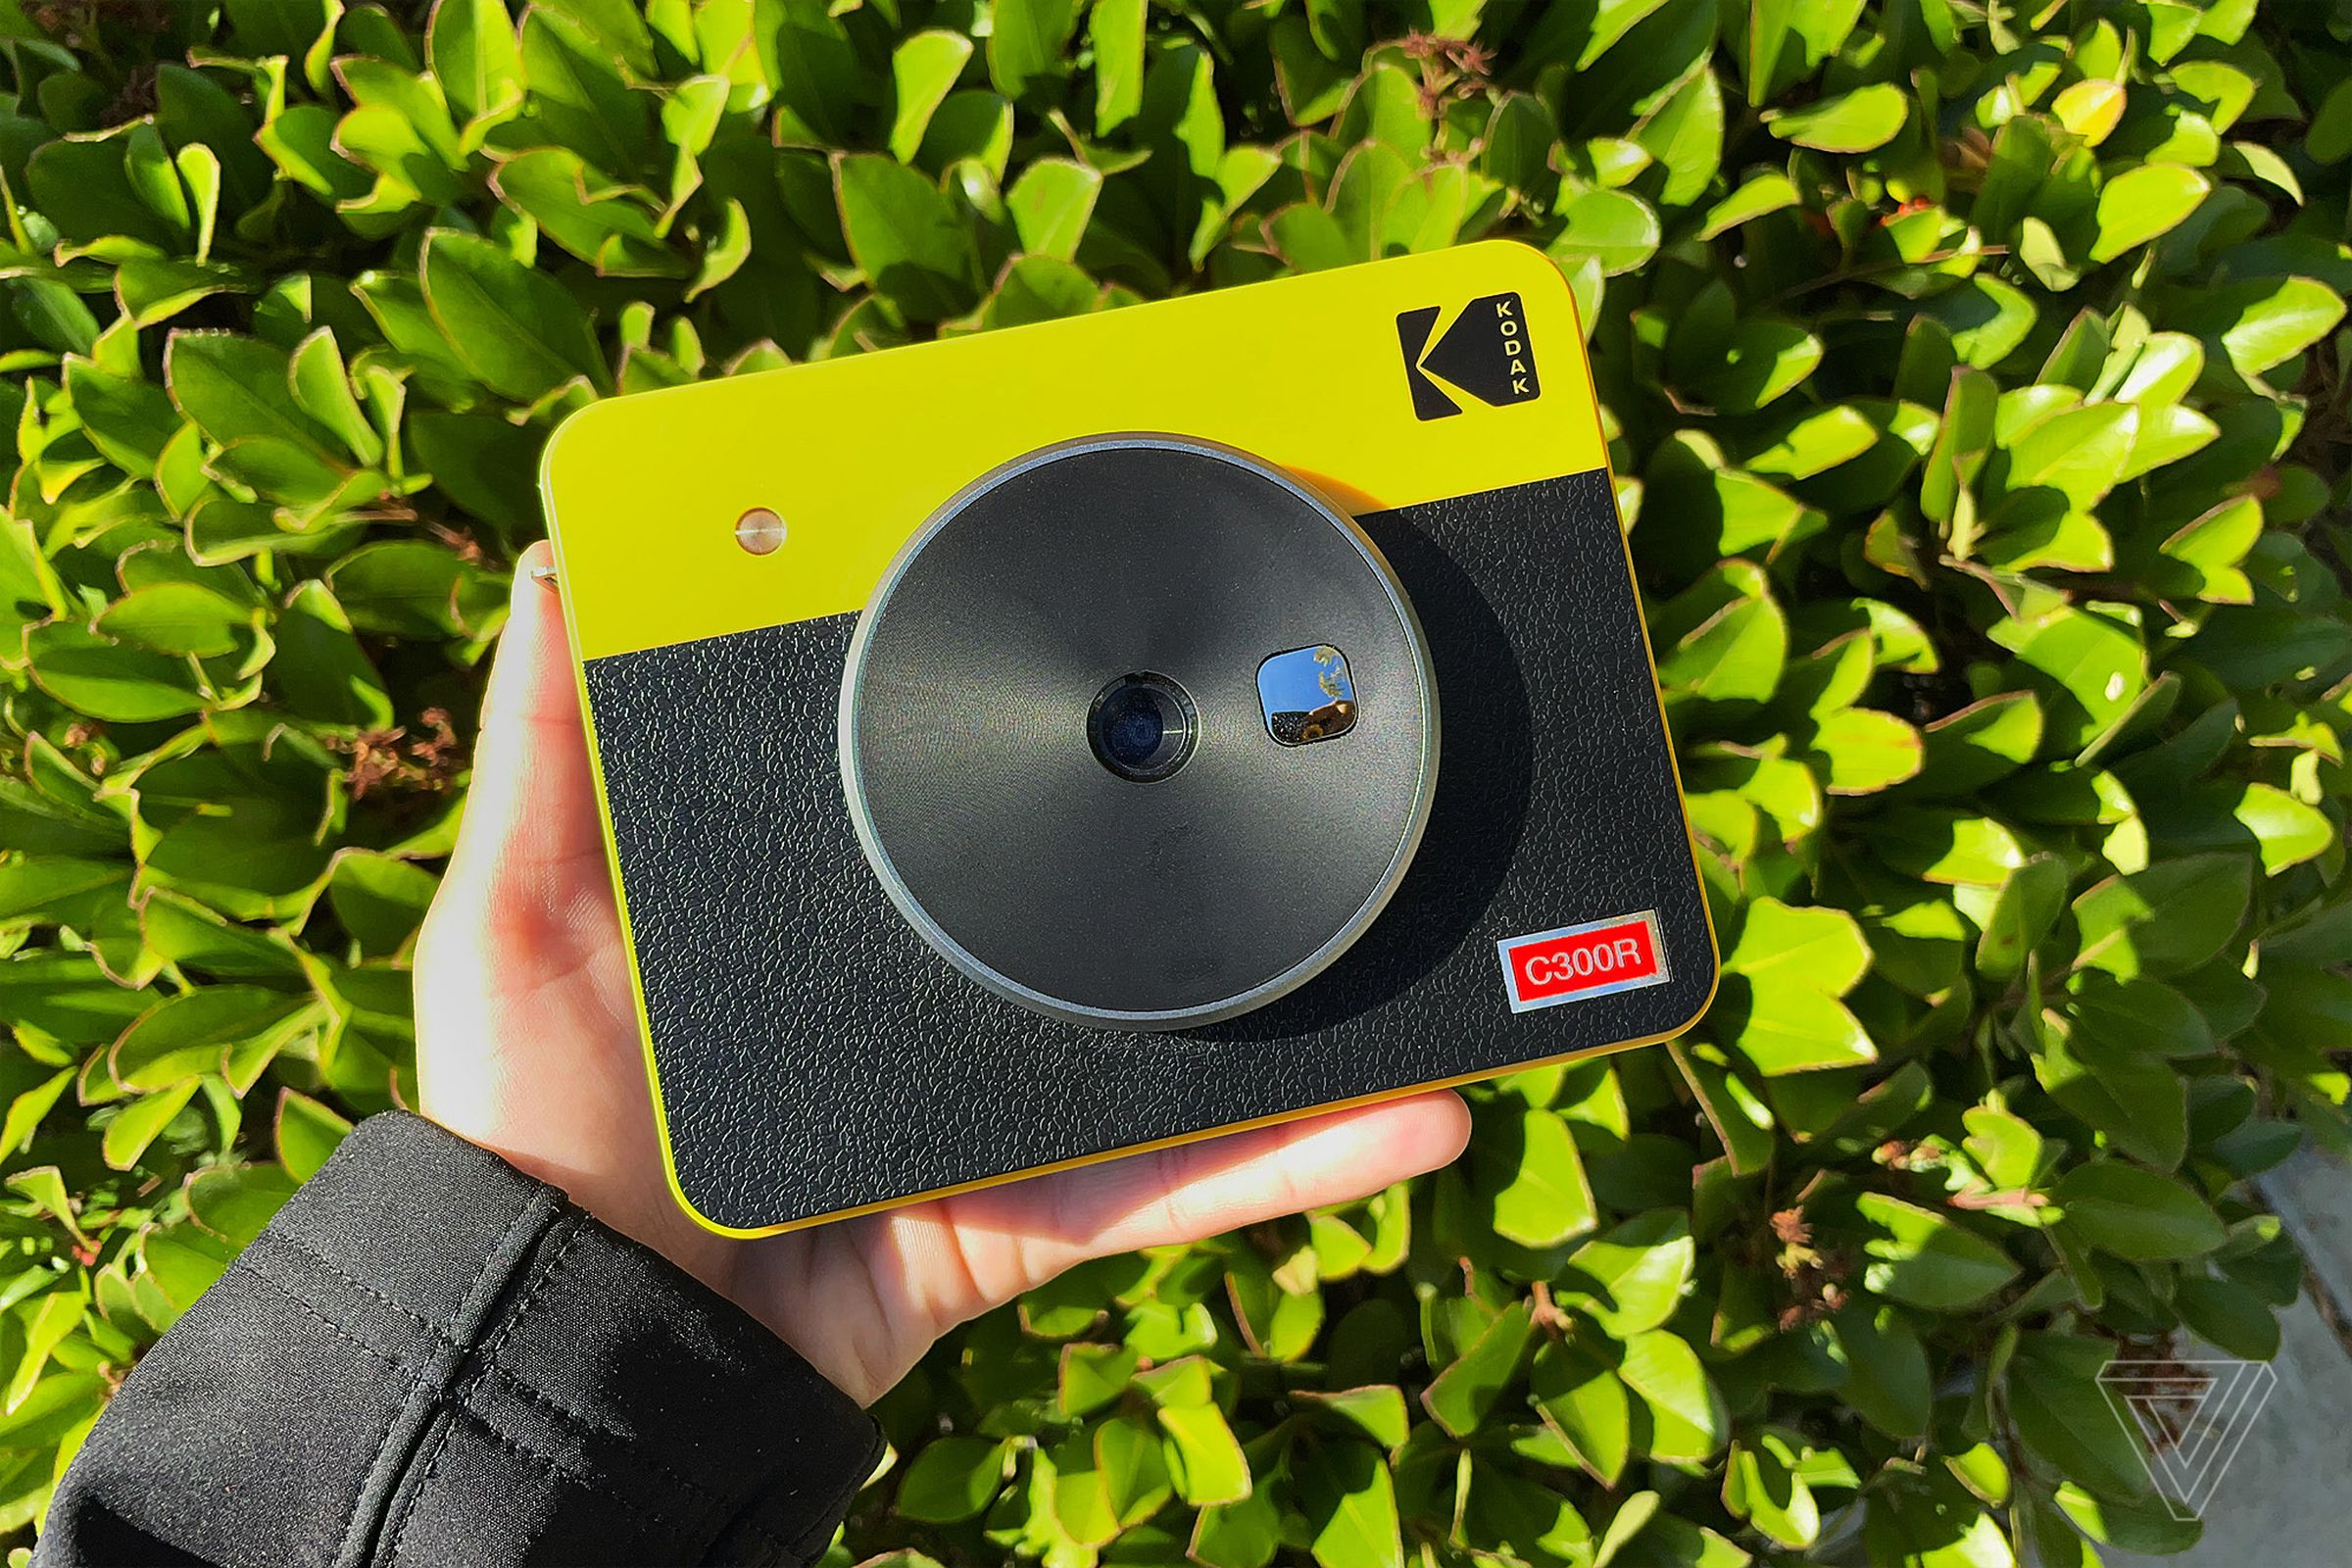 The yellow and black Kodak Mini Shot 3 Retro being held up sideways with a hand and a bush as the background.